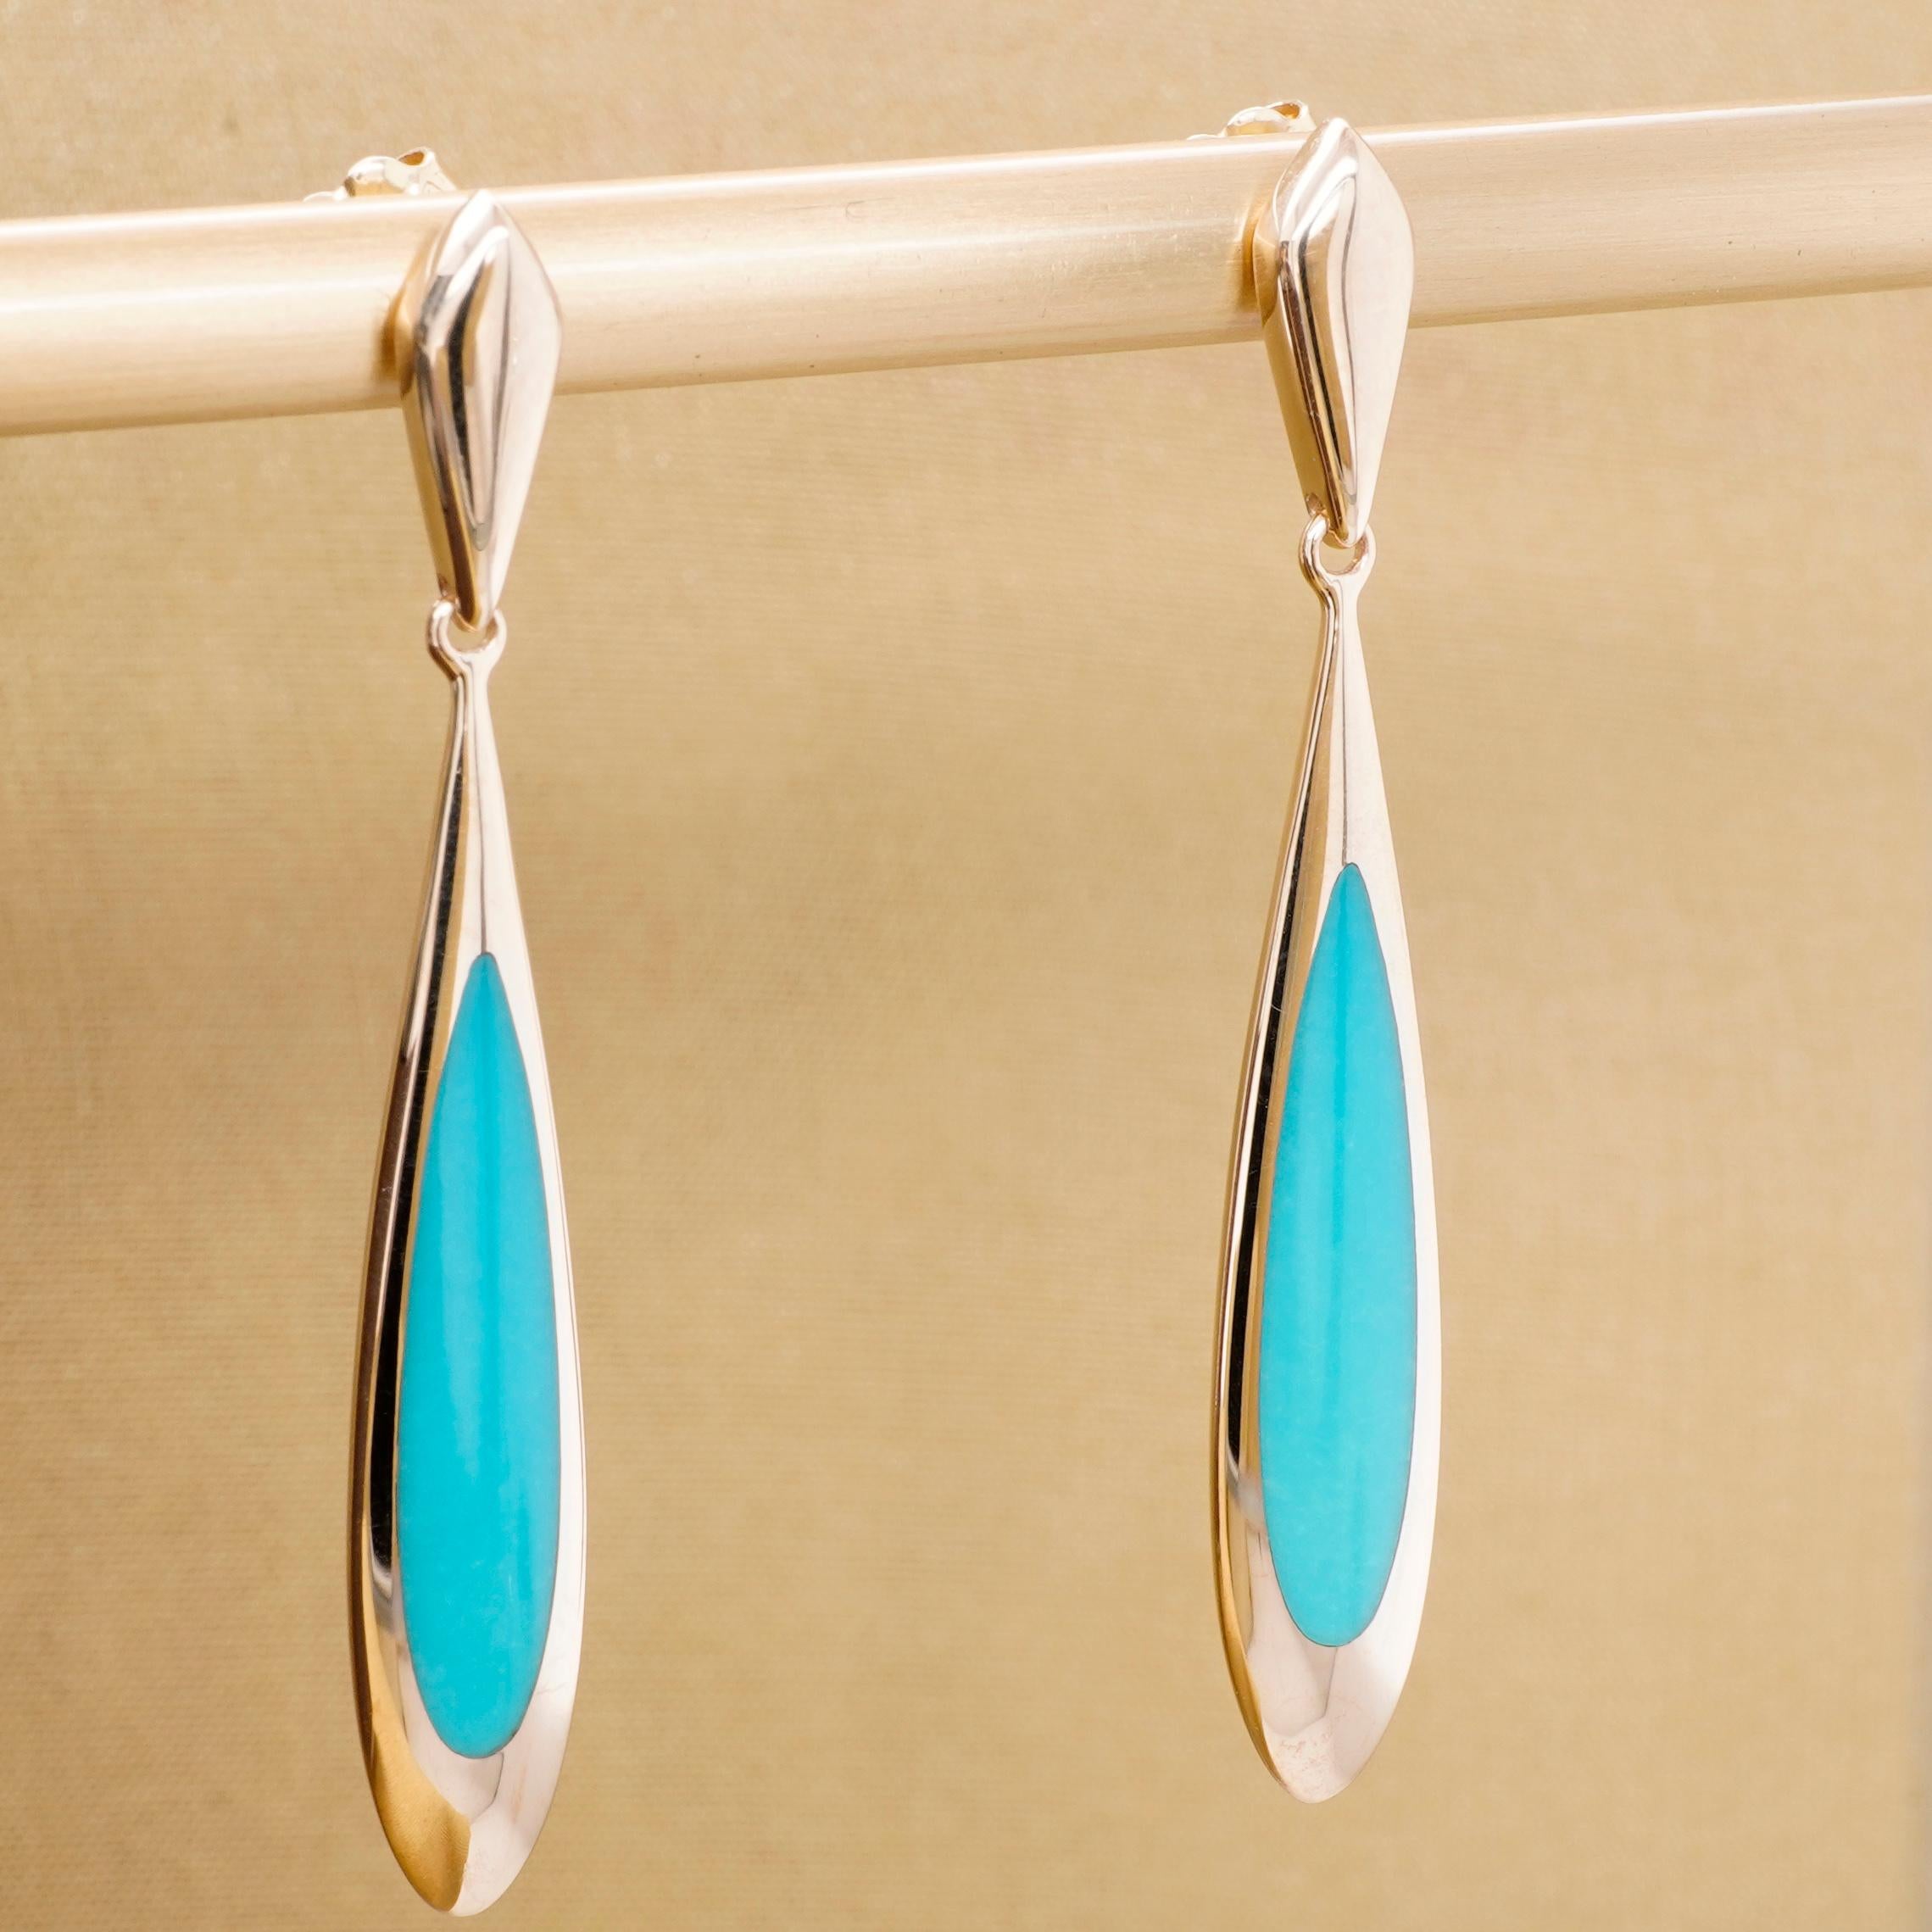 earrings with long posts